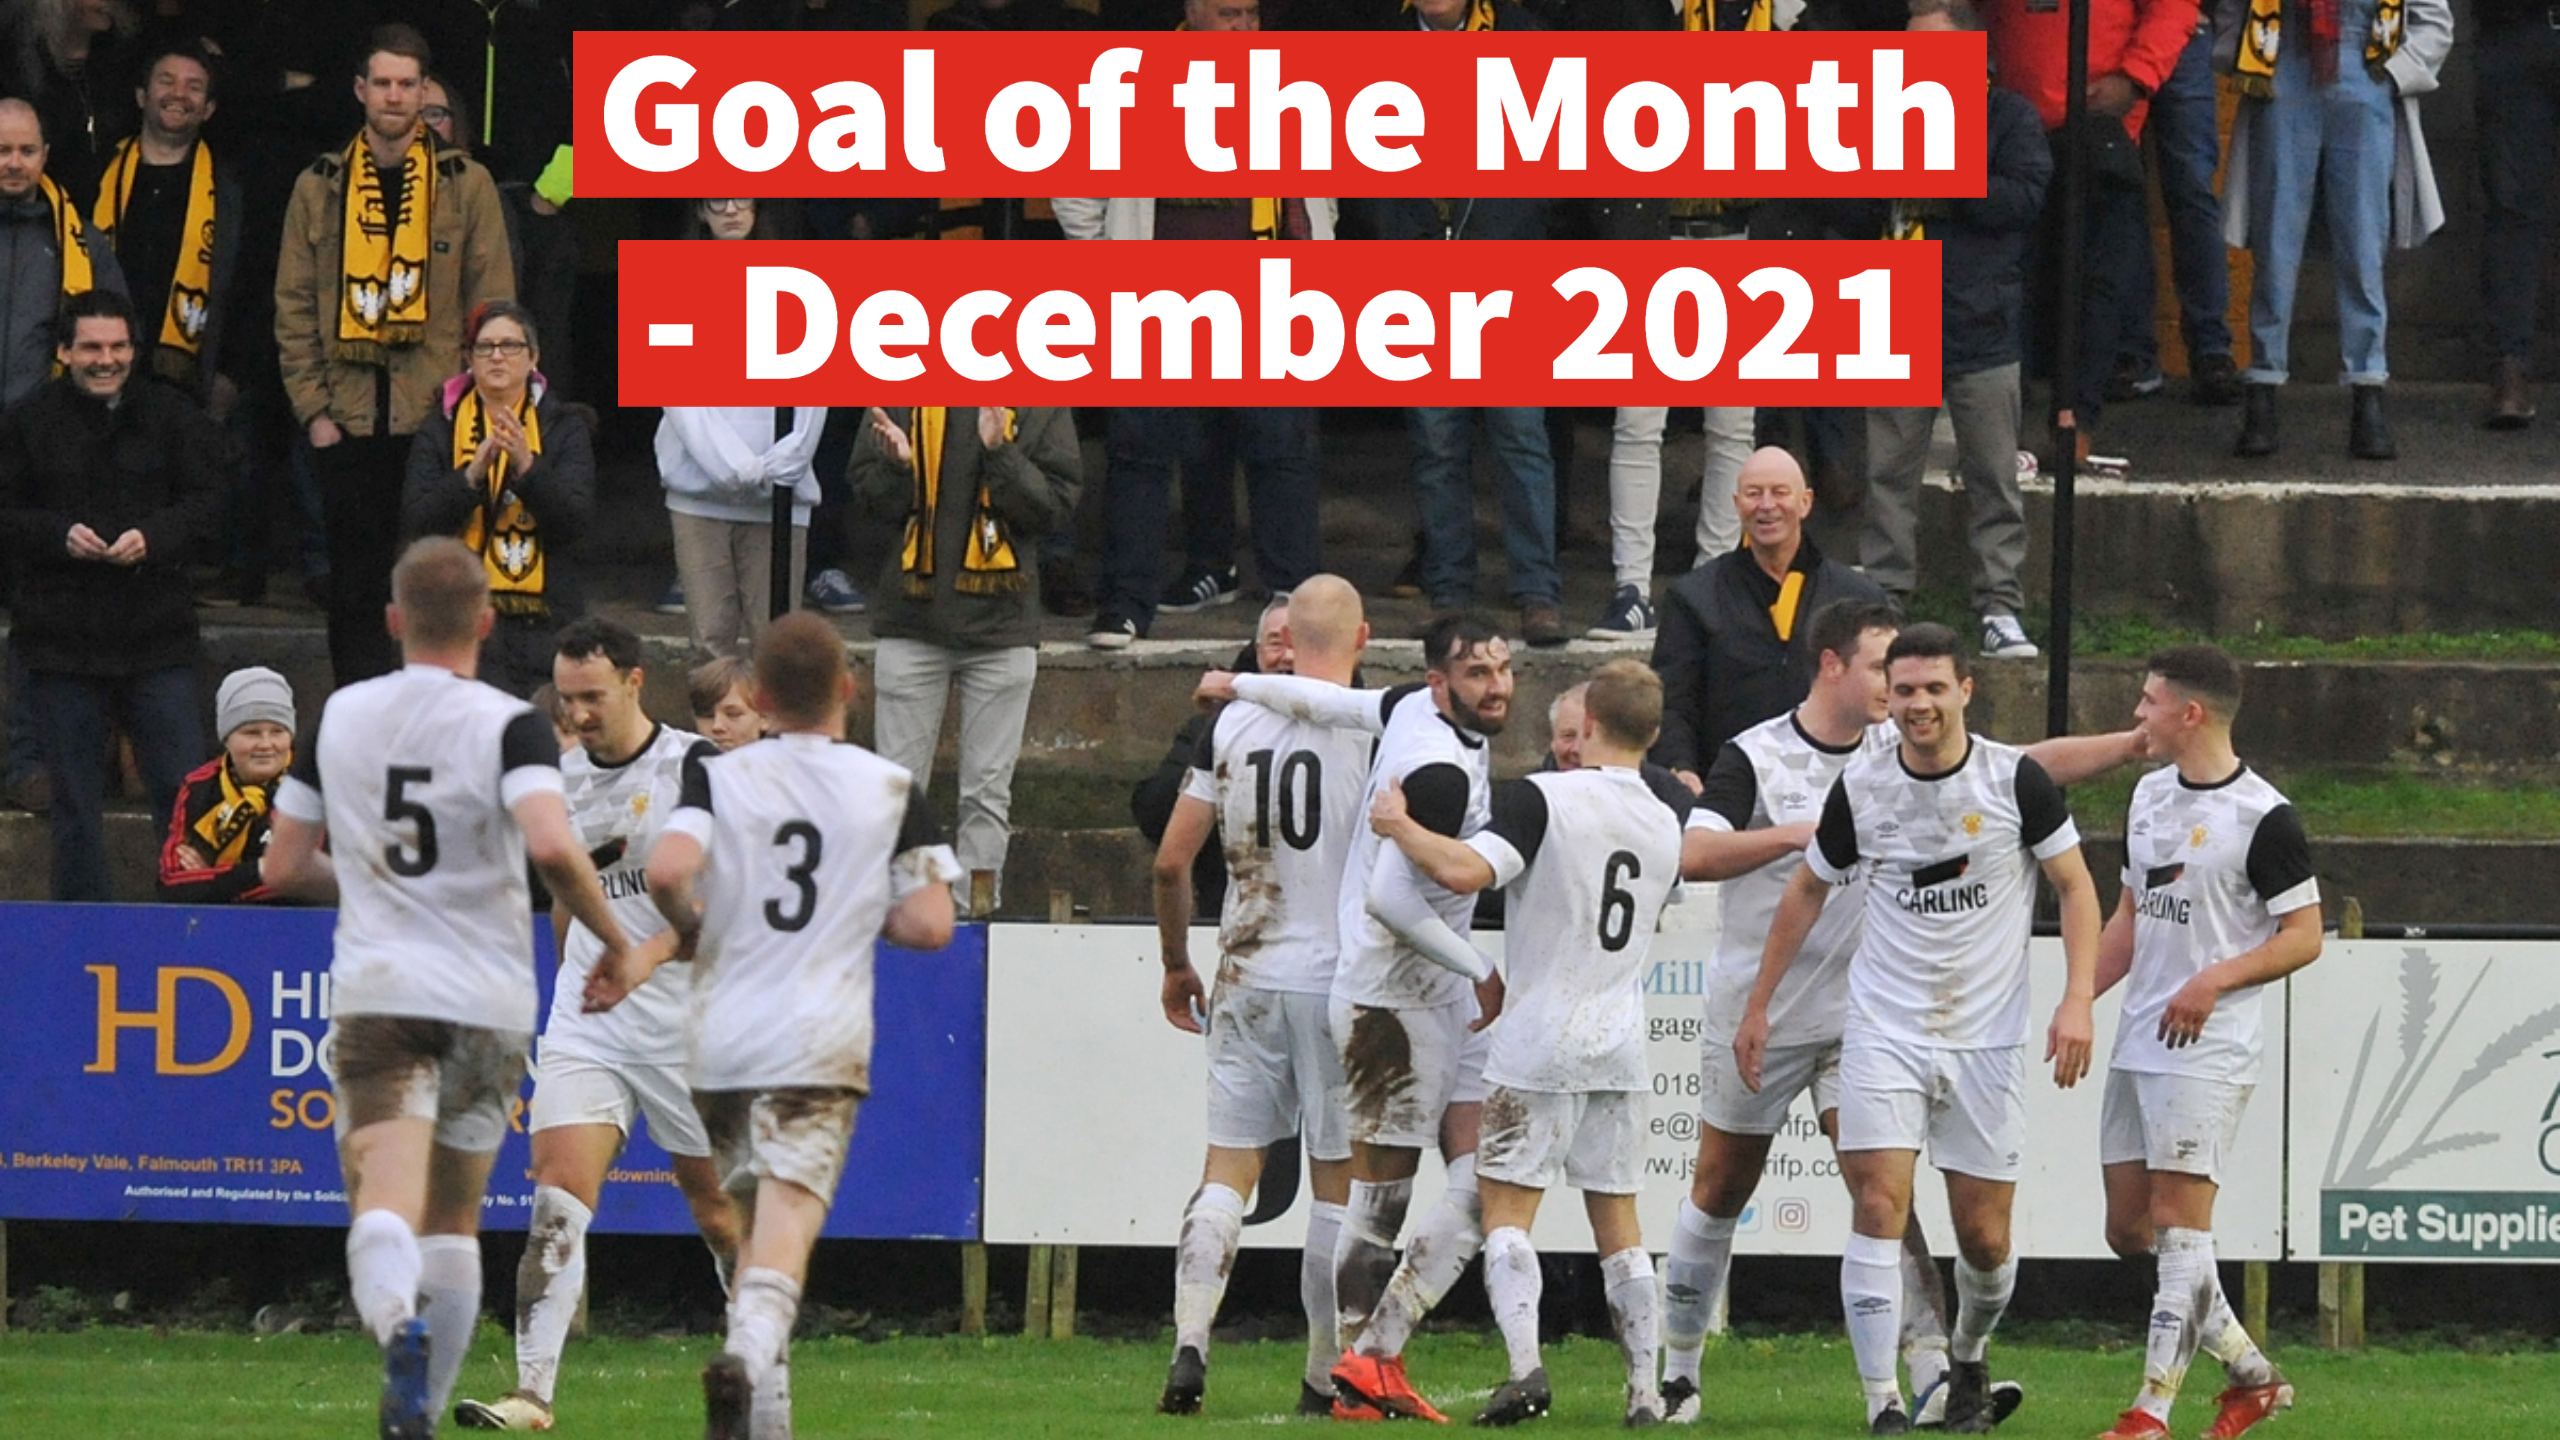 Goal of the Month - December 2021